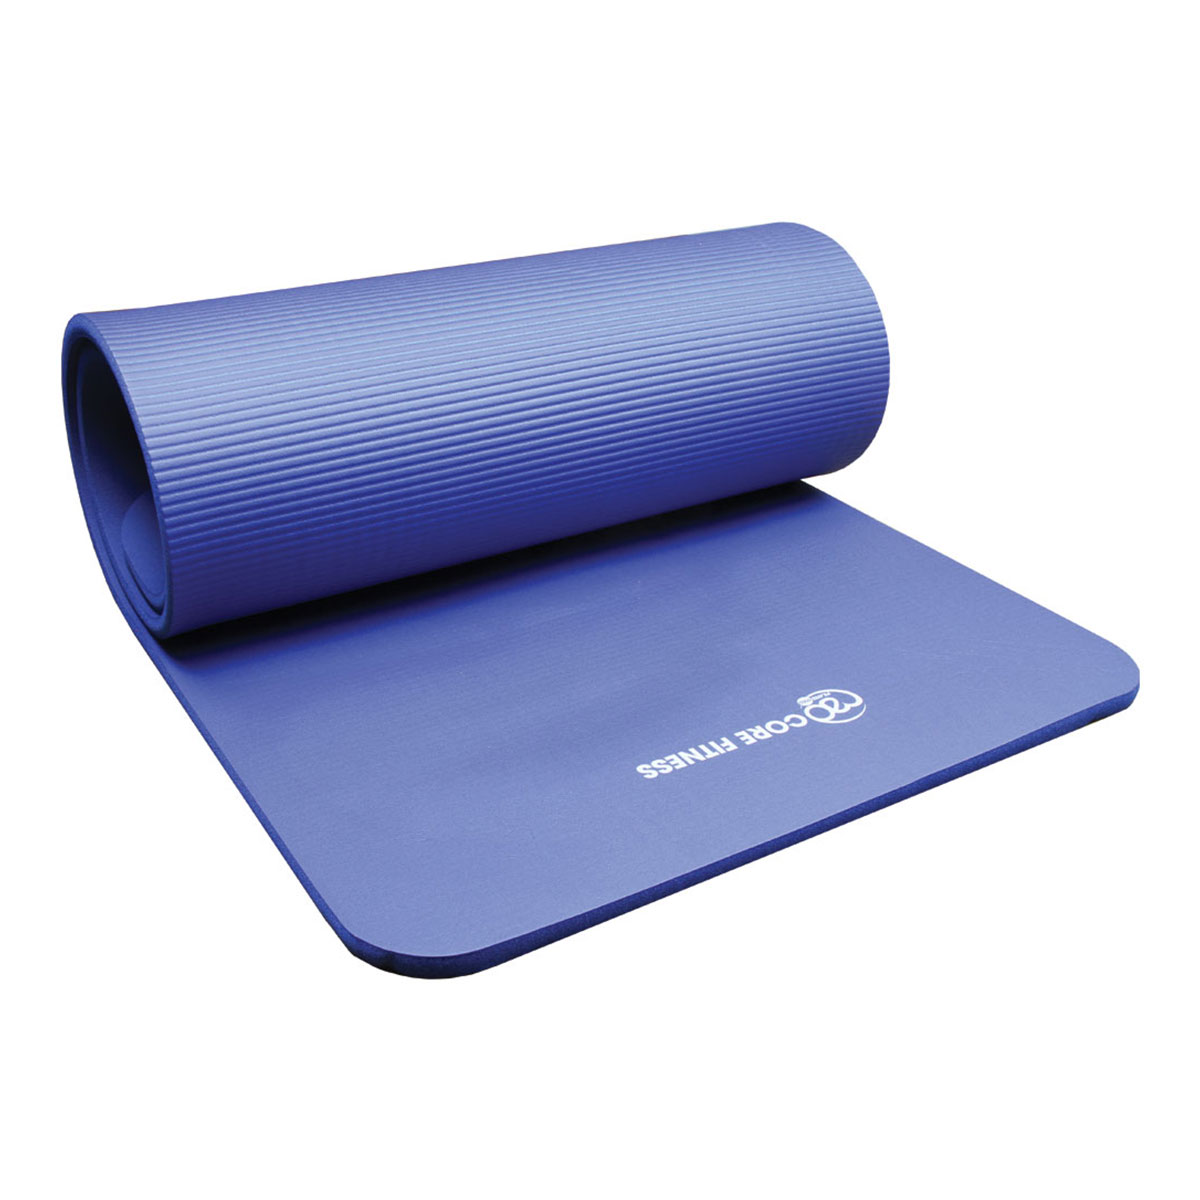 Fitness Mad Core-Fitness Mat 10mm - Blue